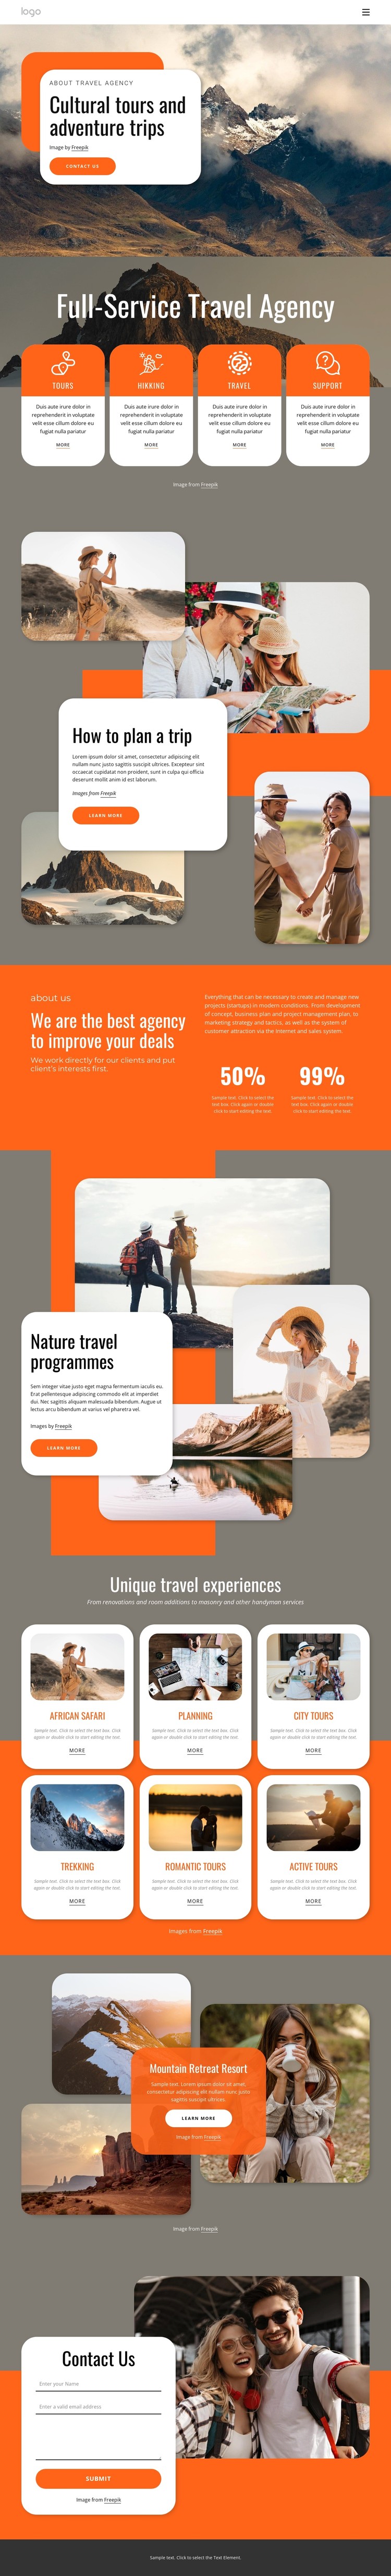 Group travel for all ages CSS Template